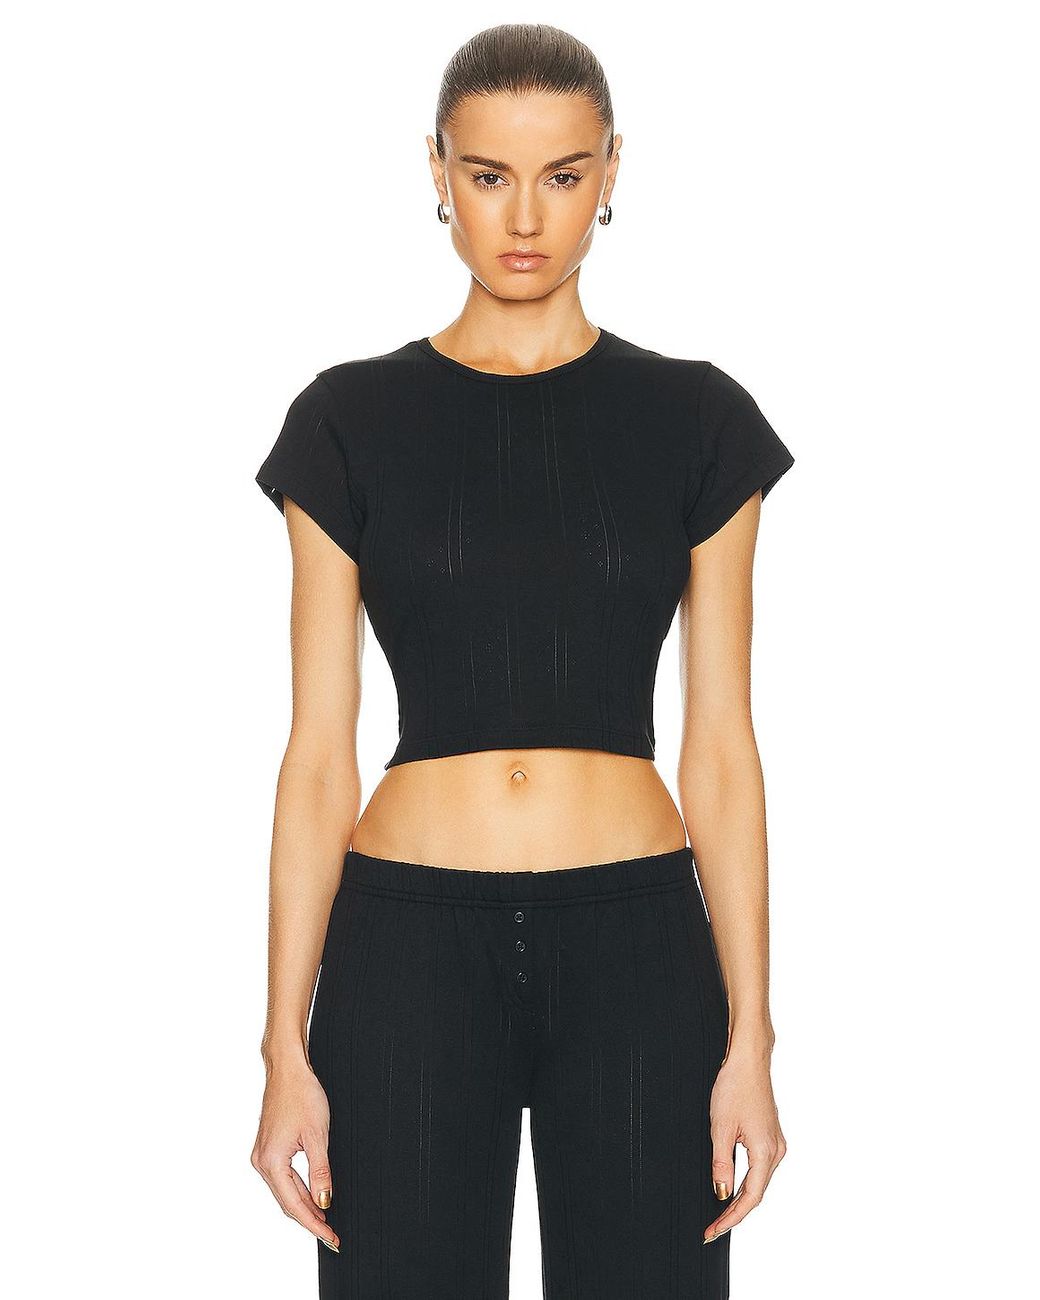 Cou Cou Intimates The Baby Tee in Black